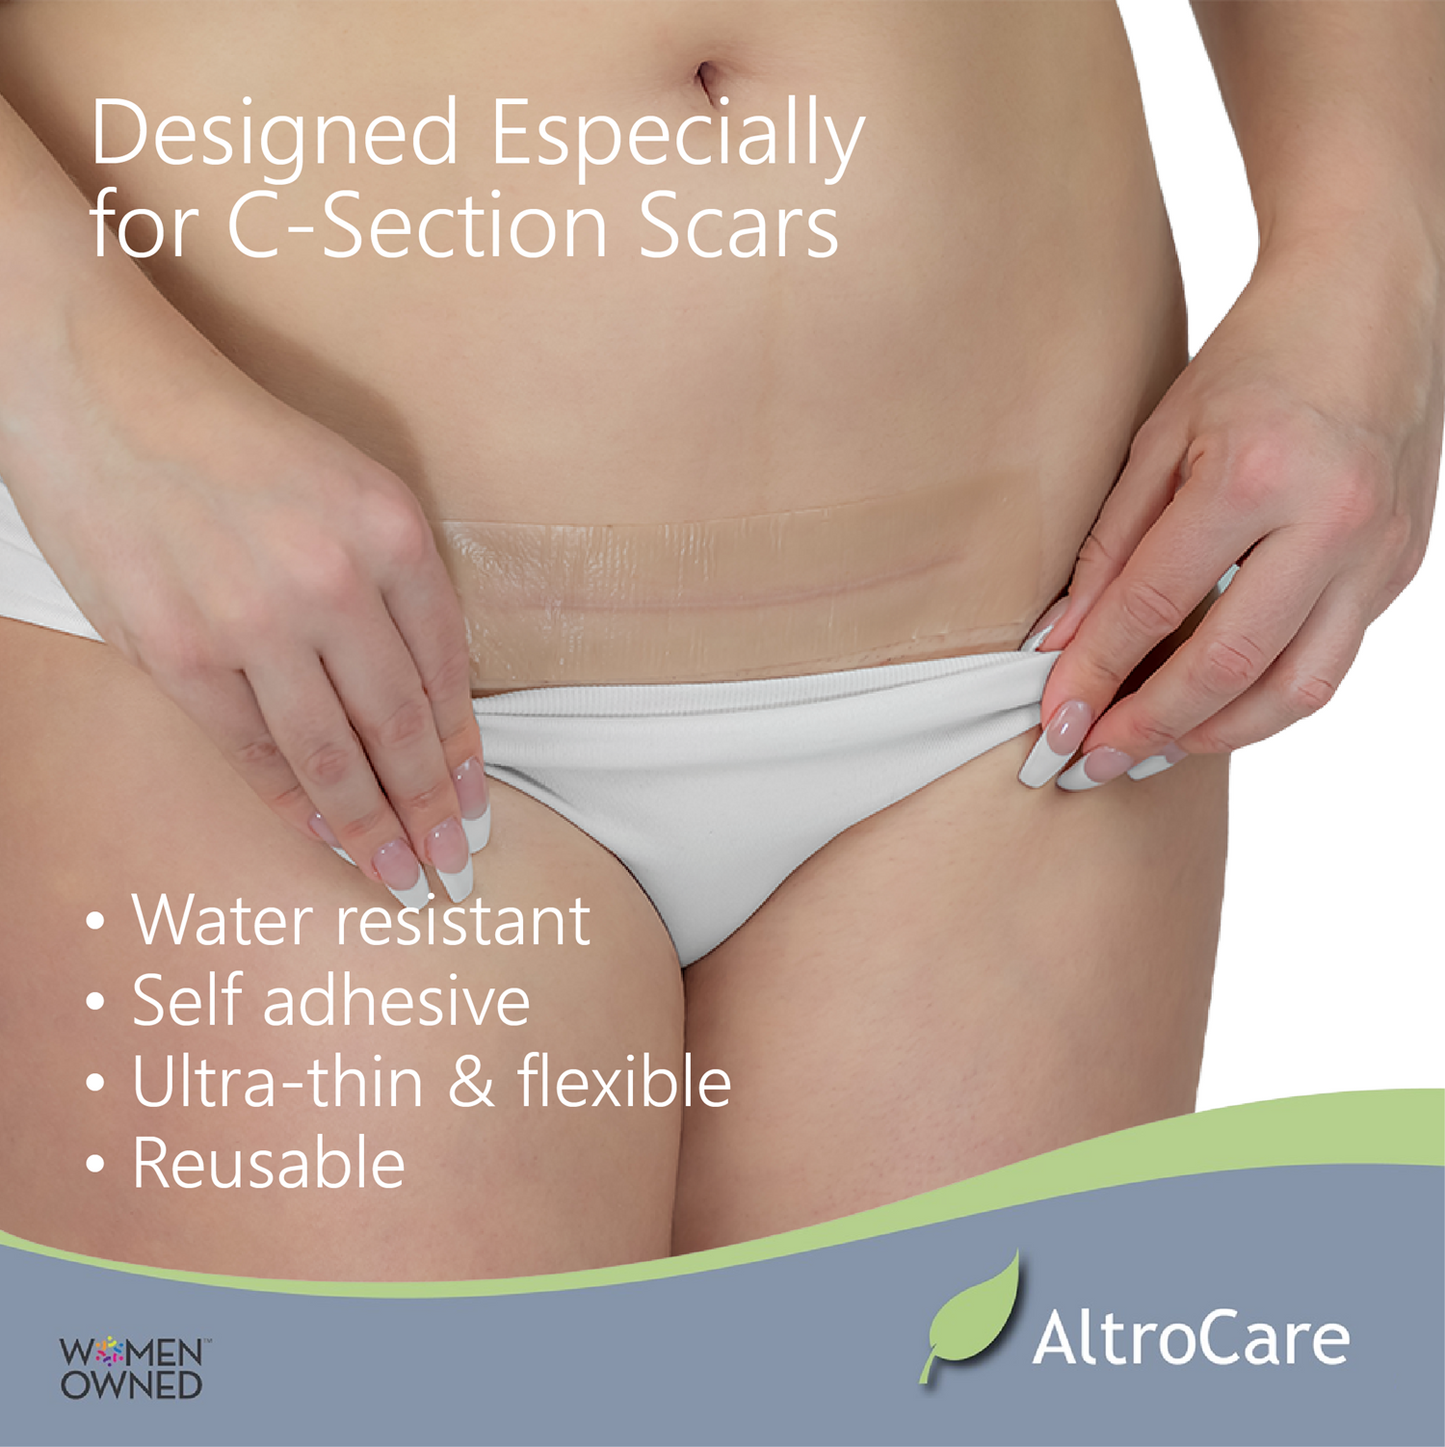 C-Section Scar Sheets